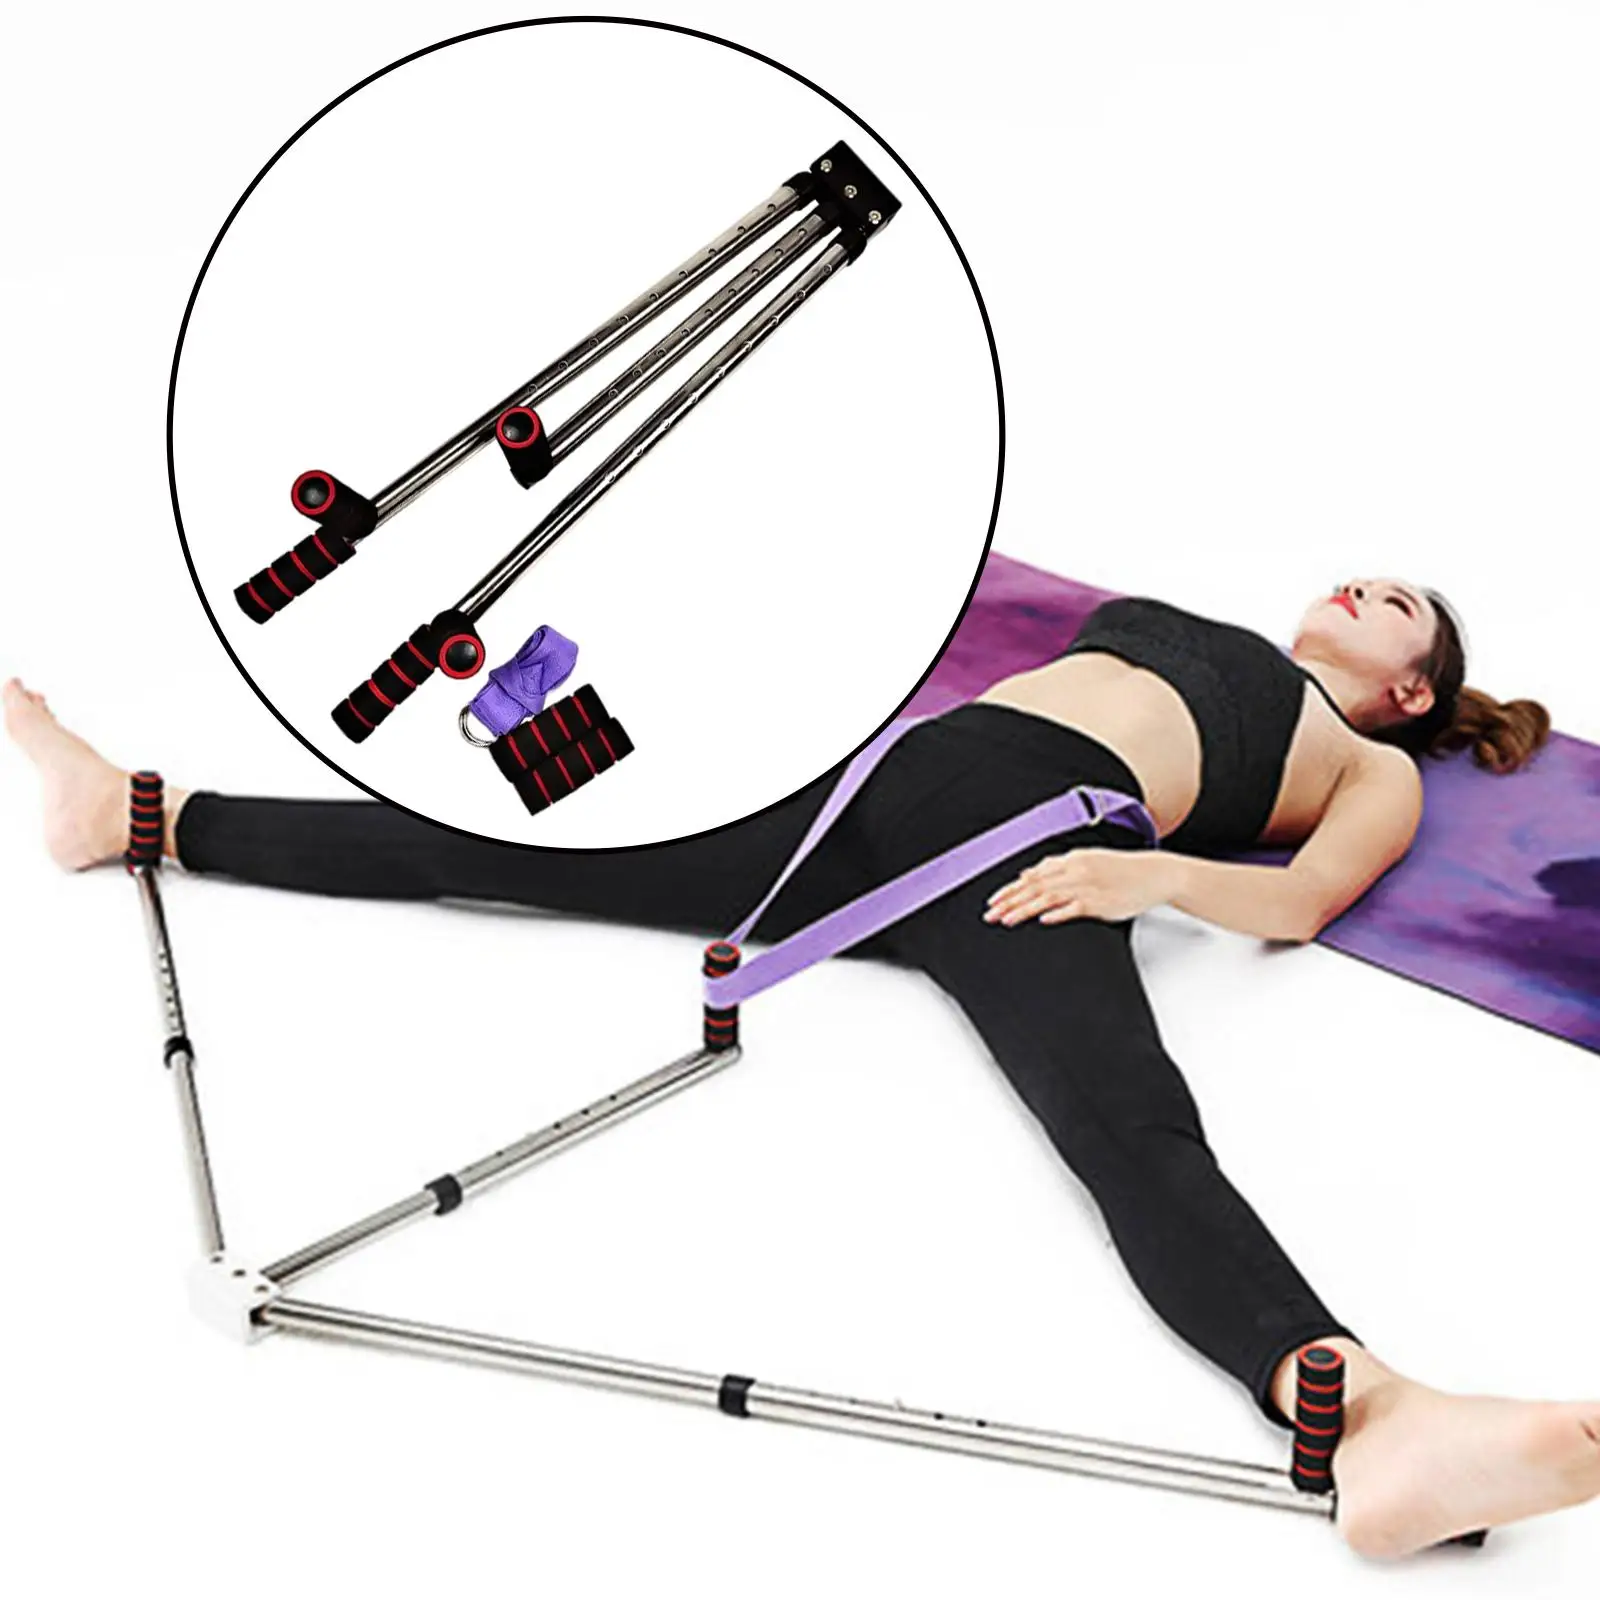 Stretching Machine Stainless Steel Comfortable Leg Stretcher Adjustable for Home Exercise